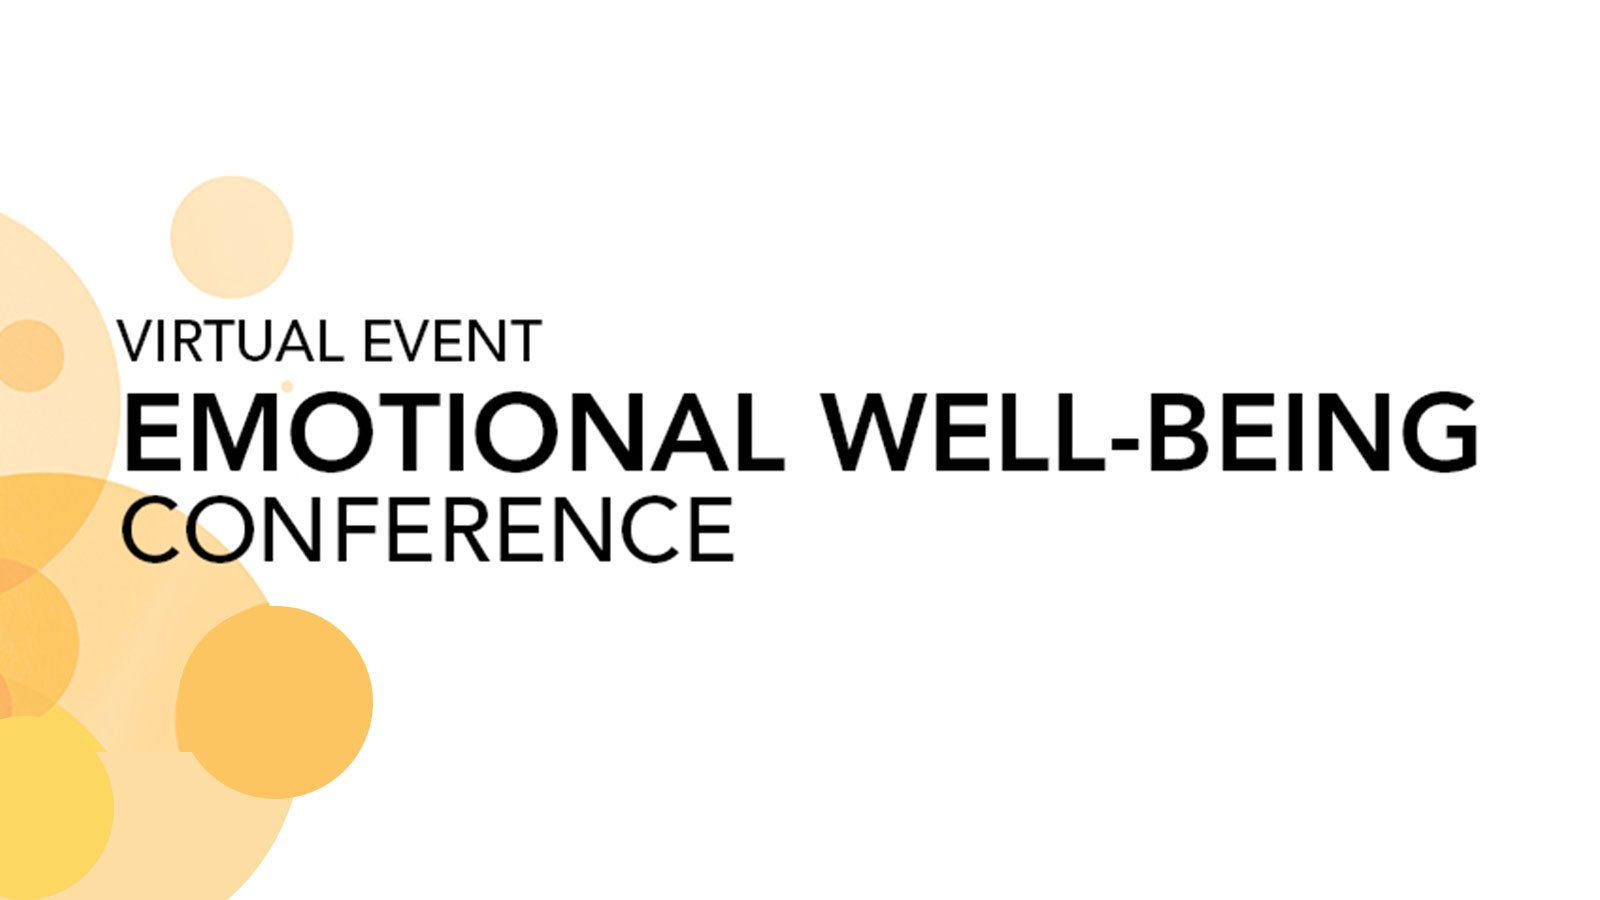 Emotional Well-Being Conference